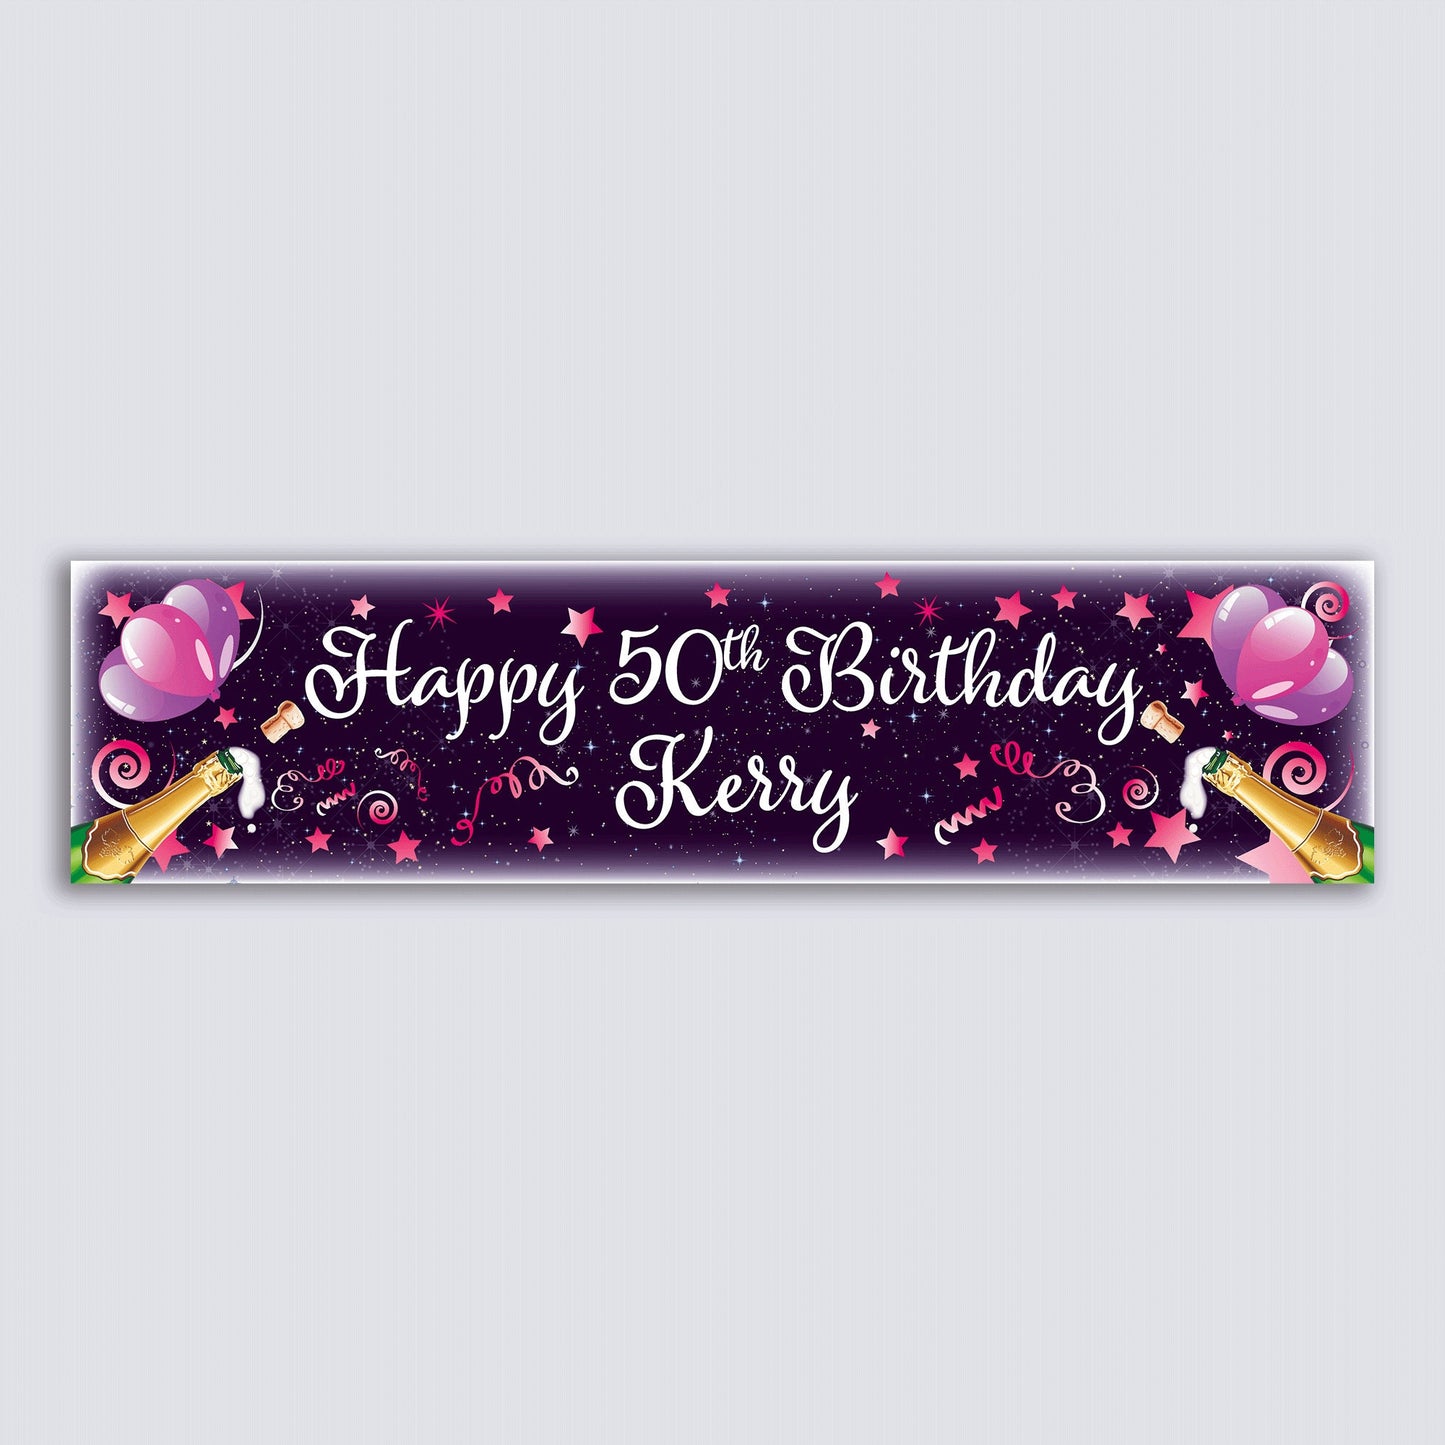 Personalised Banner - Pink Balloons & Champagne - Paper or Vinyl